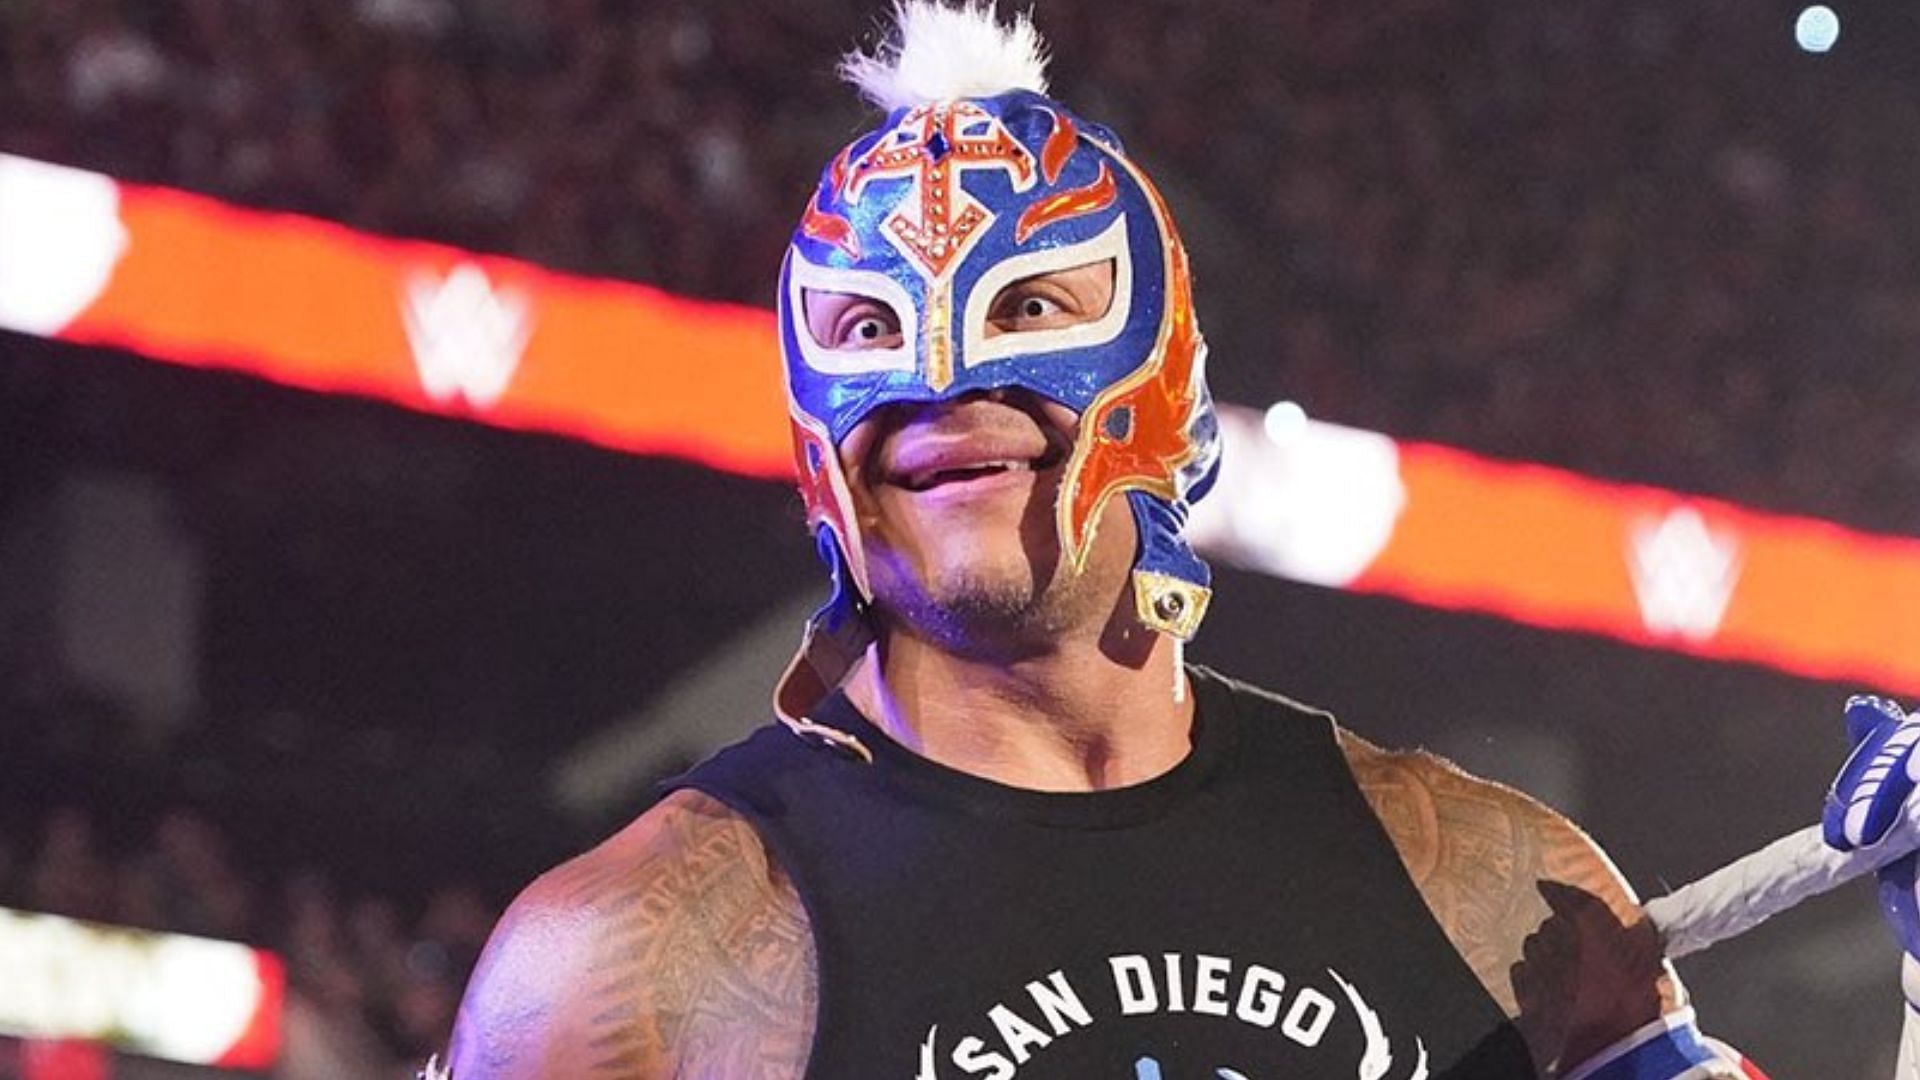 What advice did Rey Mysterio give an AEW name?